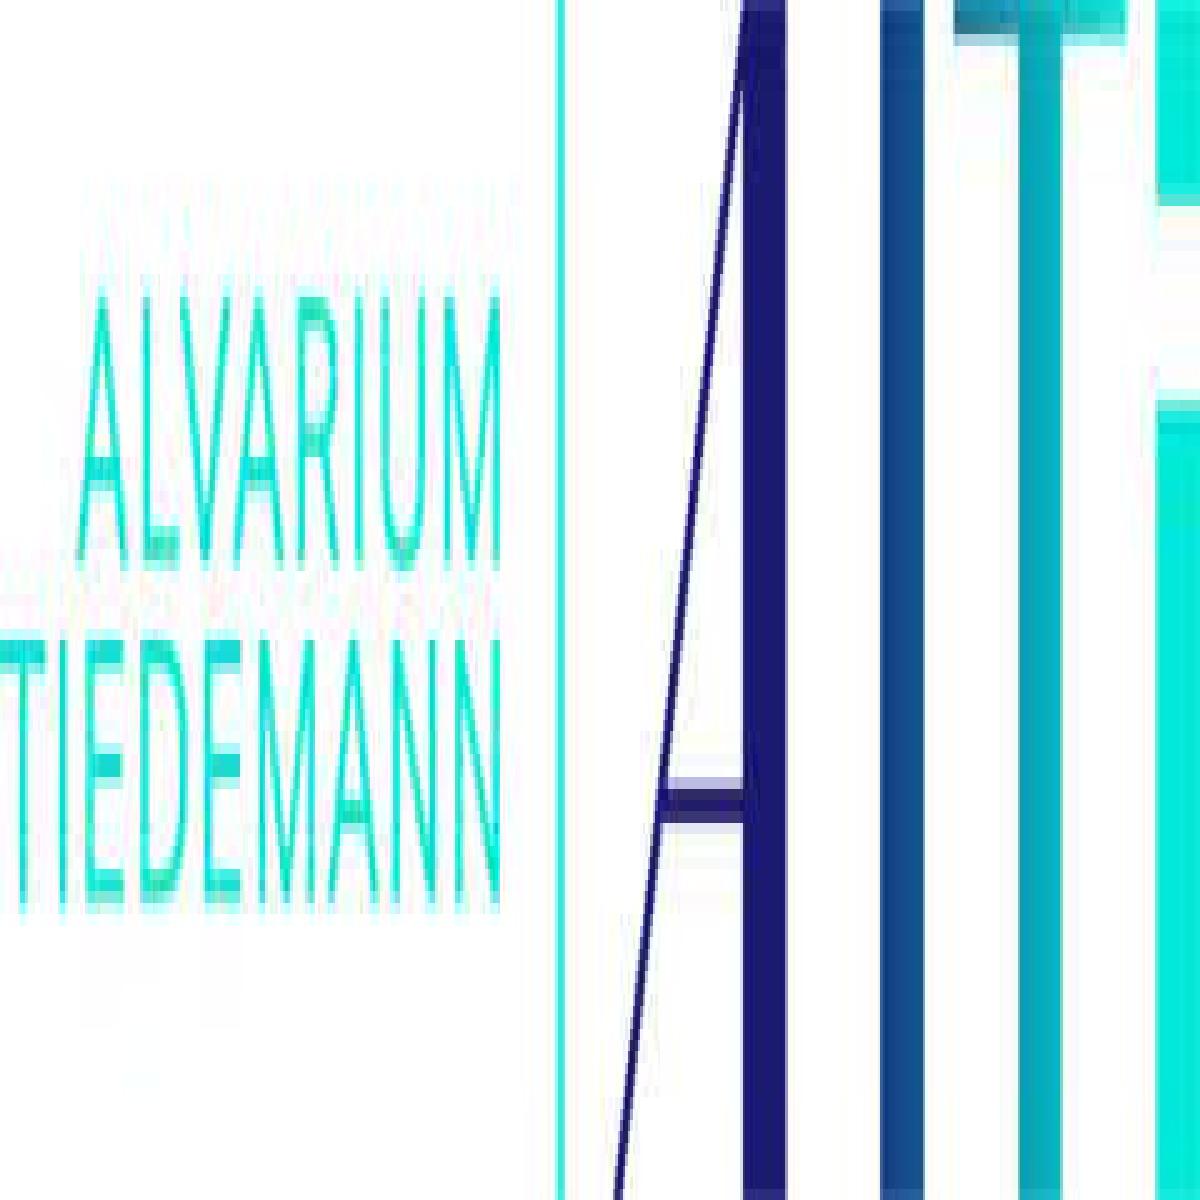 Tiedemann Group and Alvarium Investments Complete Business Combination with Cartesian Growth Corporation